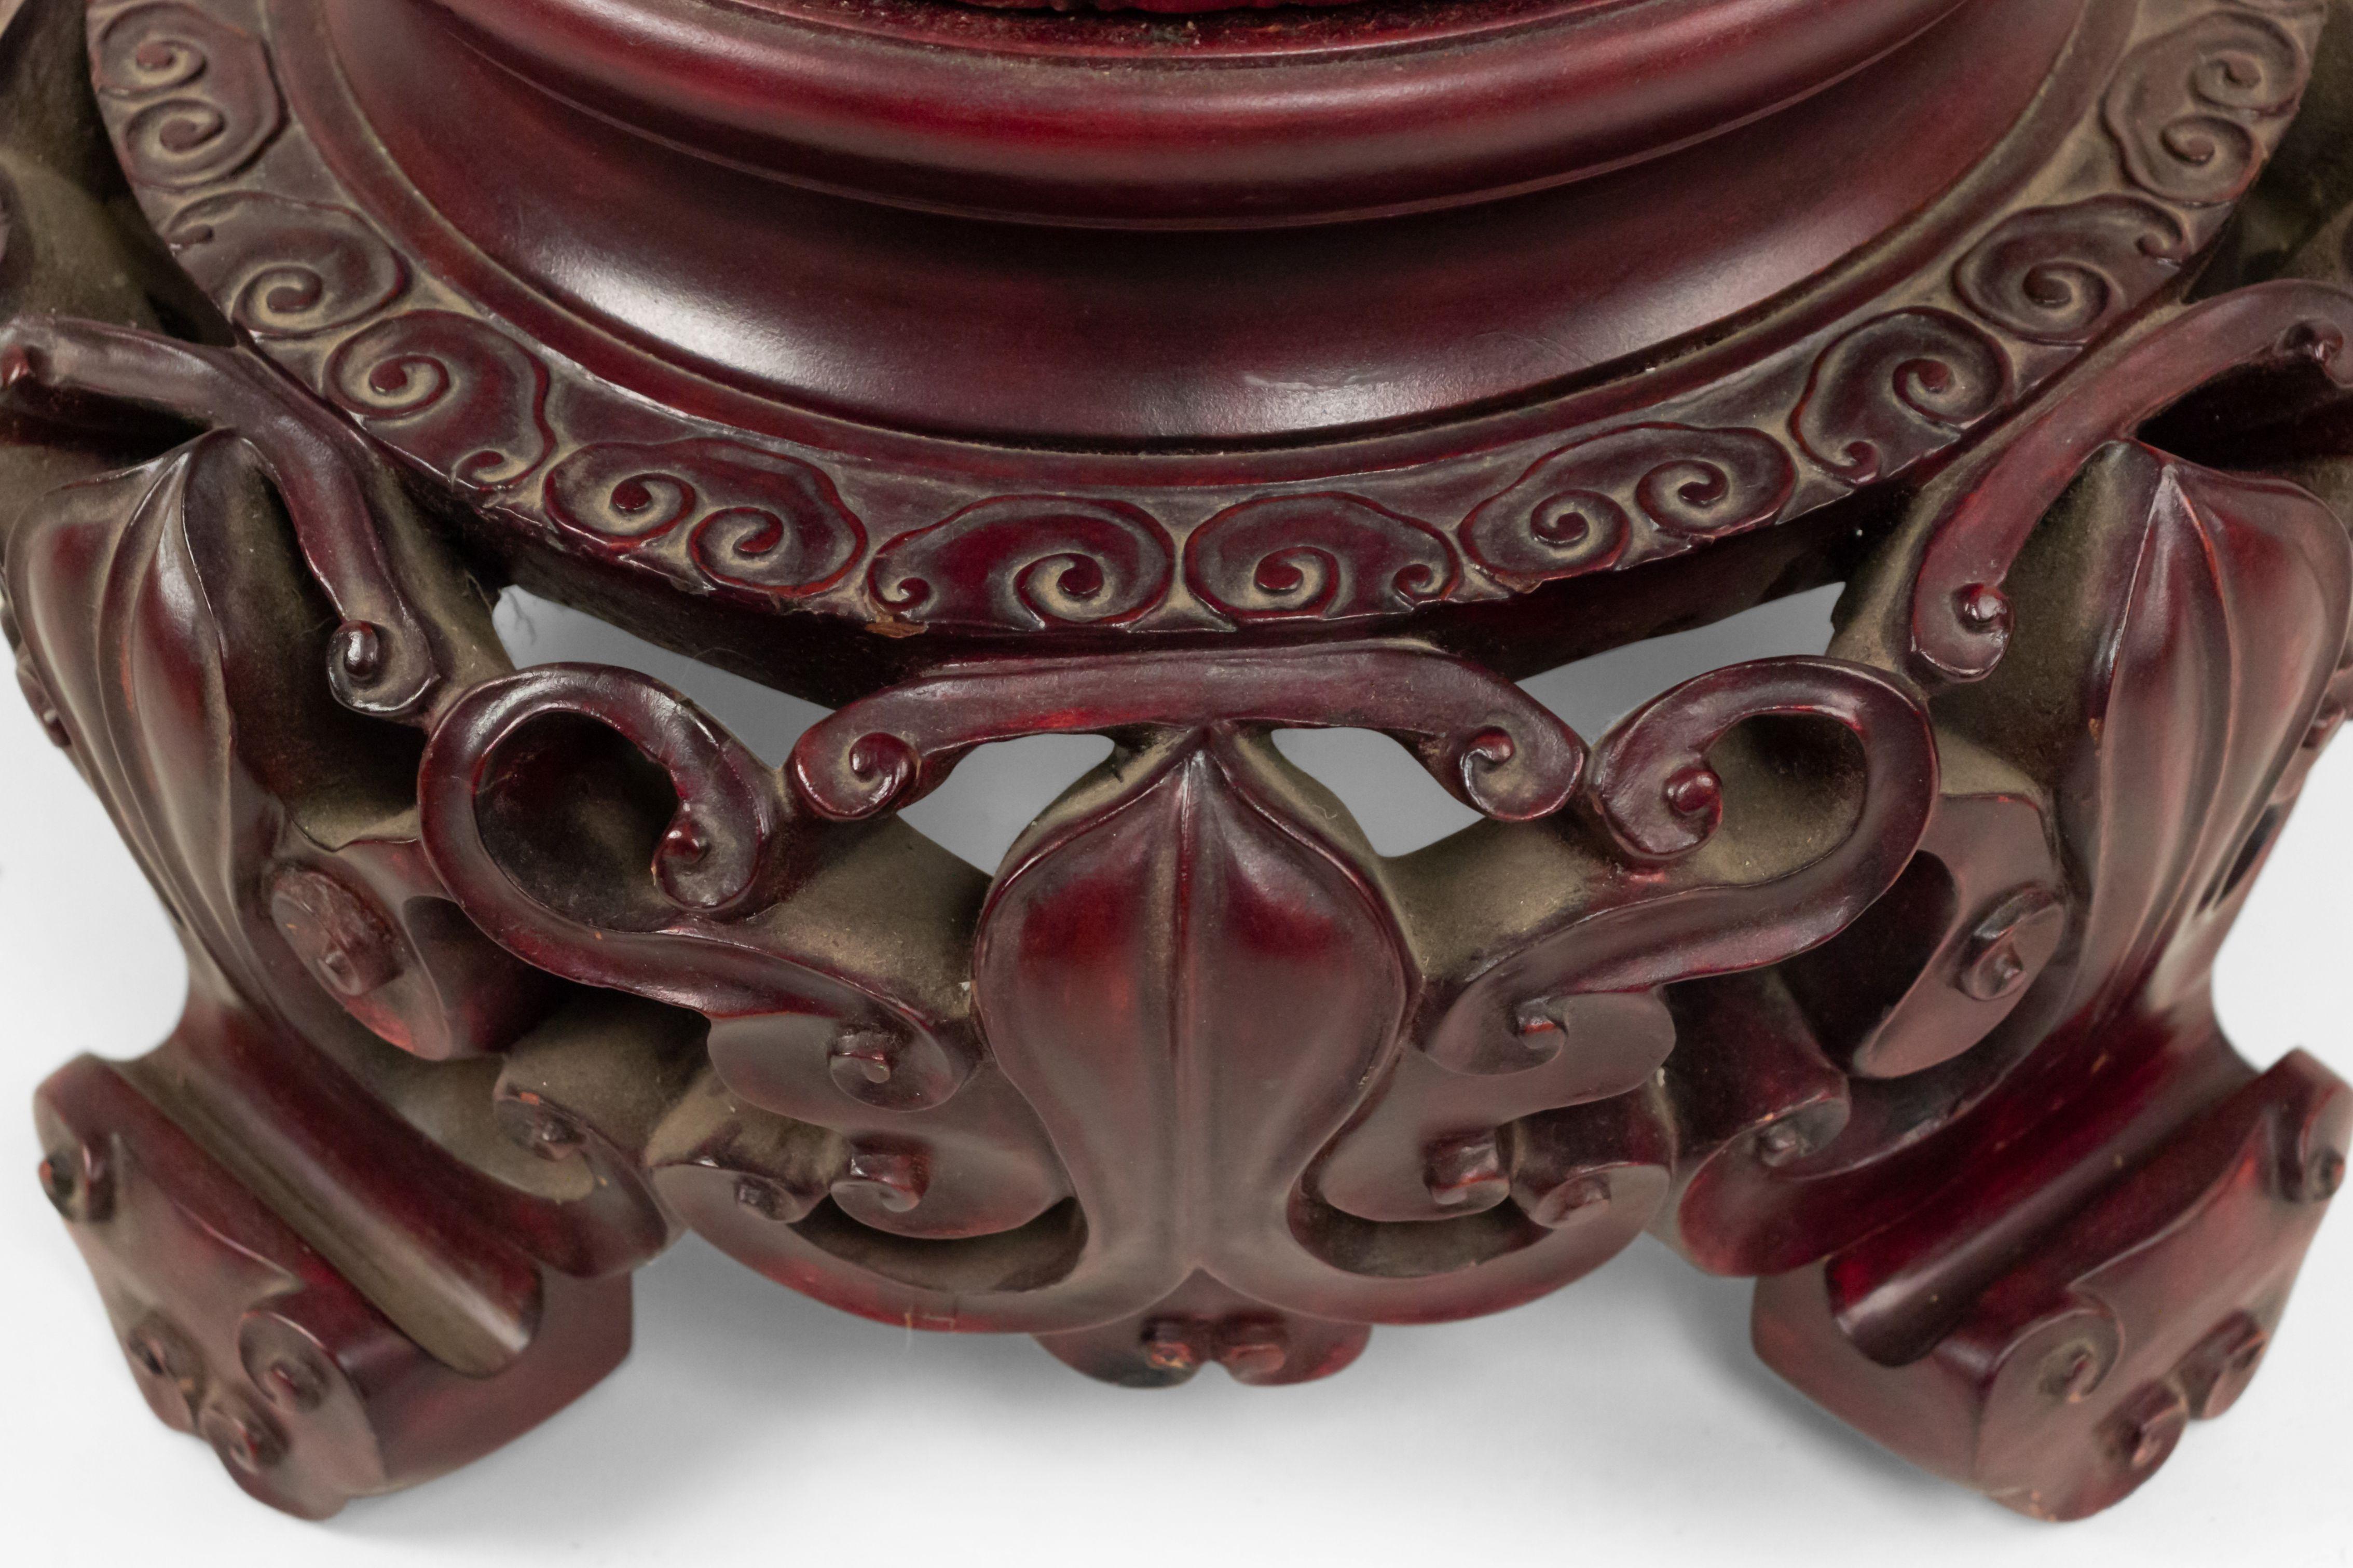 Asian Chinese-style rosewood jardiniere stand with a fluted lotus design over a carved filigree round base with 4 feet.
       